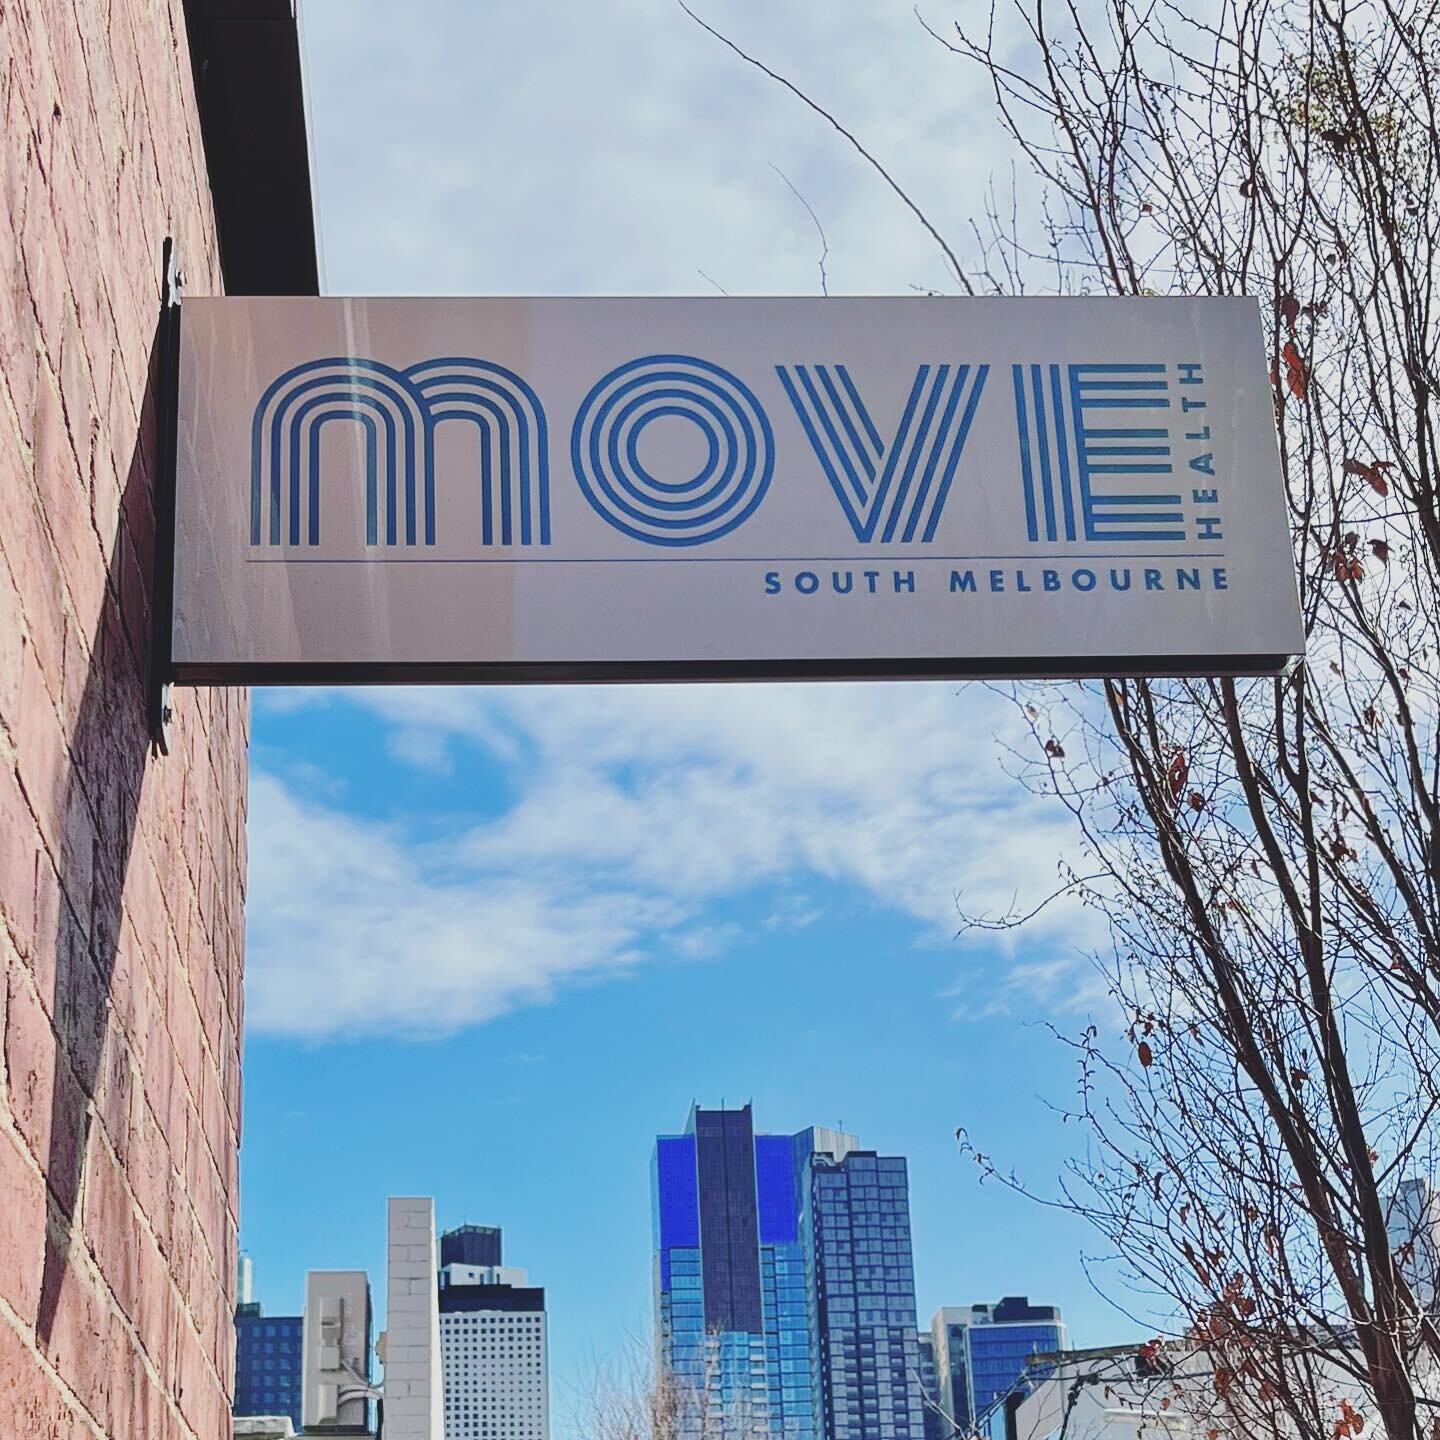 MOVE HEALTH |

Now seeing Physio &amp; Pilates clients from Move Health in South Melbourne. Home to @themovementworkshop_physio and @melbfamilysportspodiatry it&rsquo;s lovely to be back in South Melbourne and working with like minded colleagues. 

I